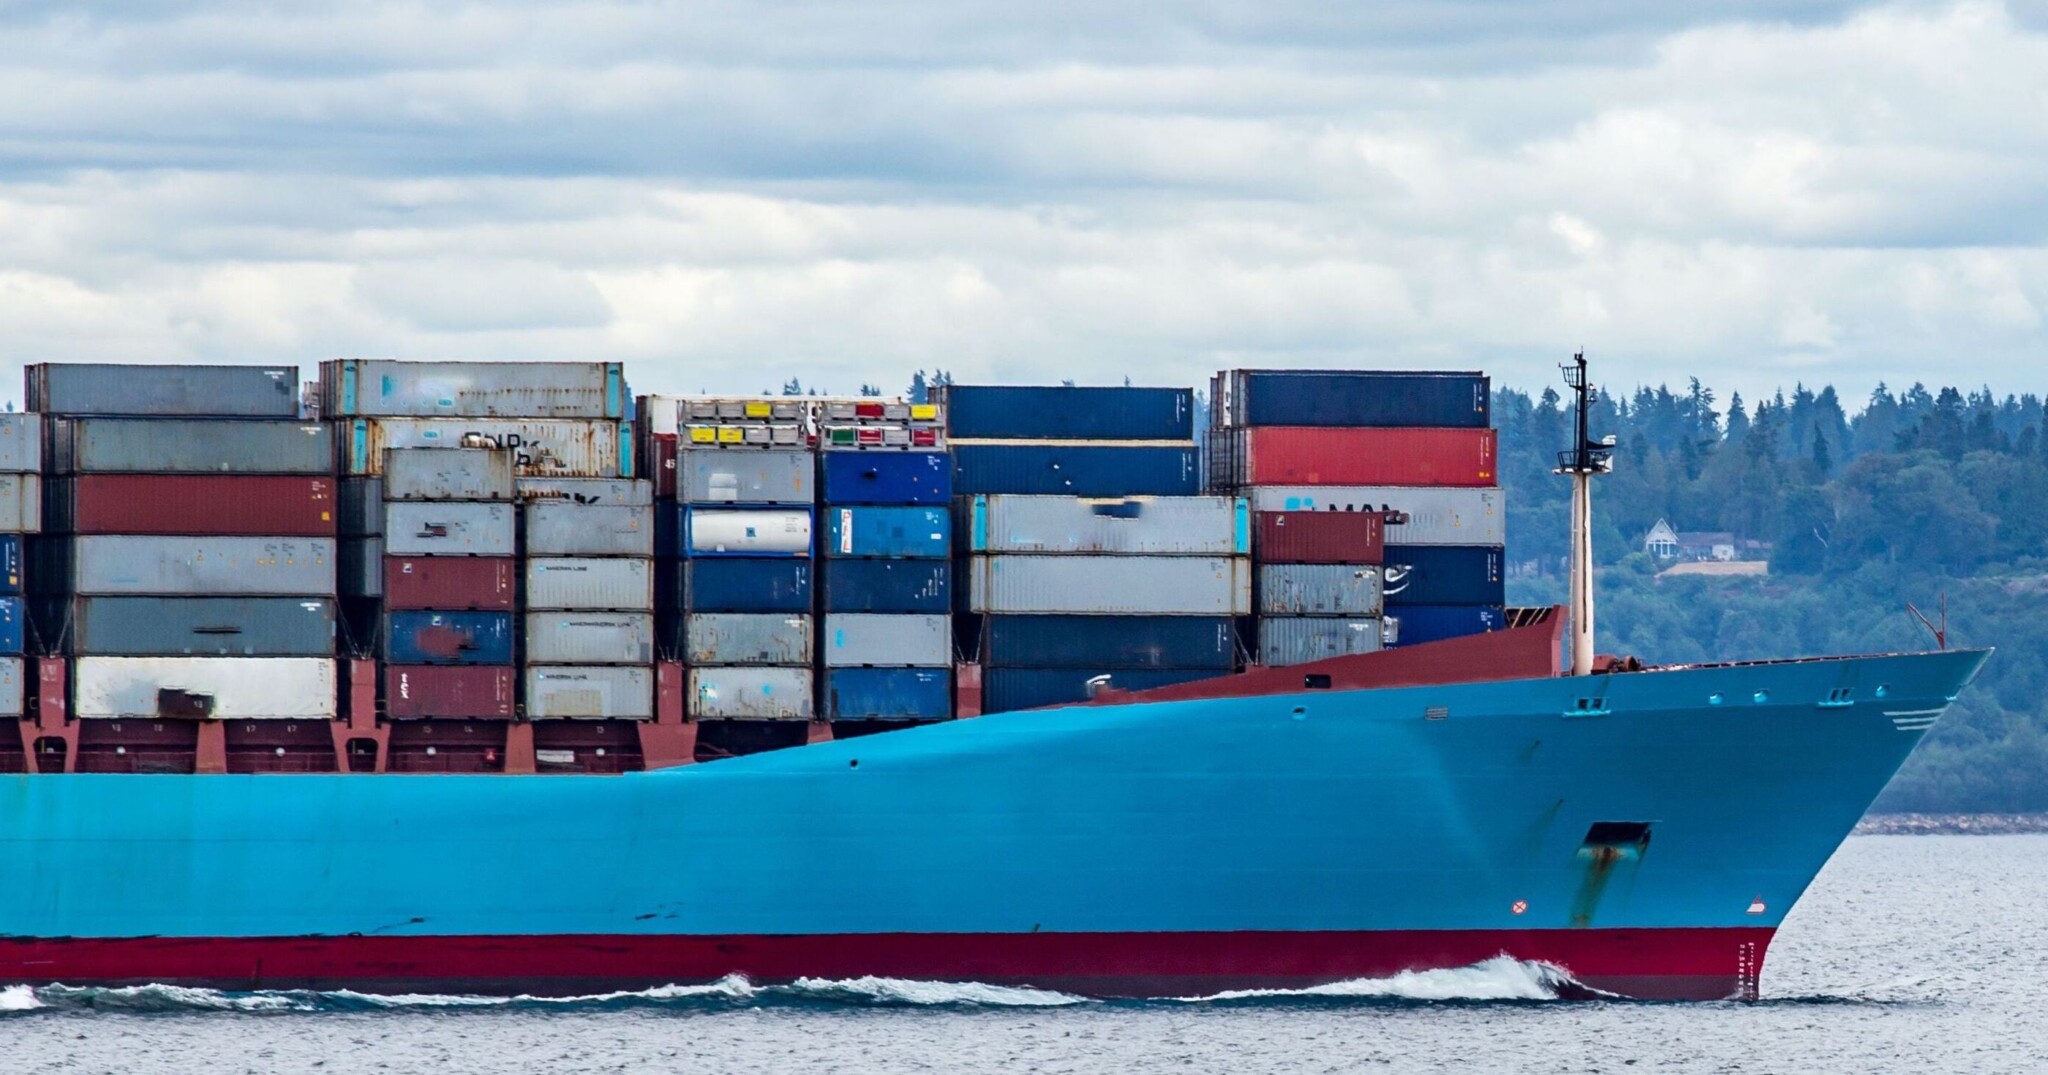 A photograph of a large blue container ship.